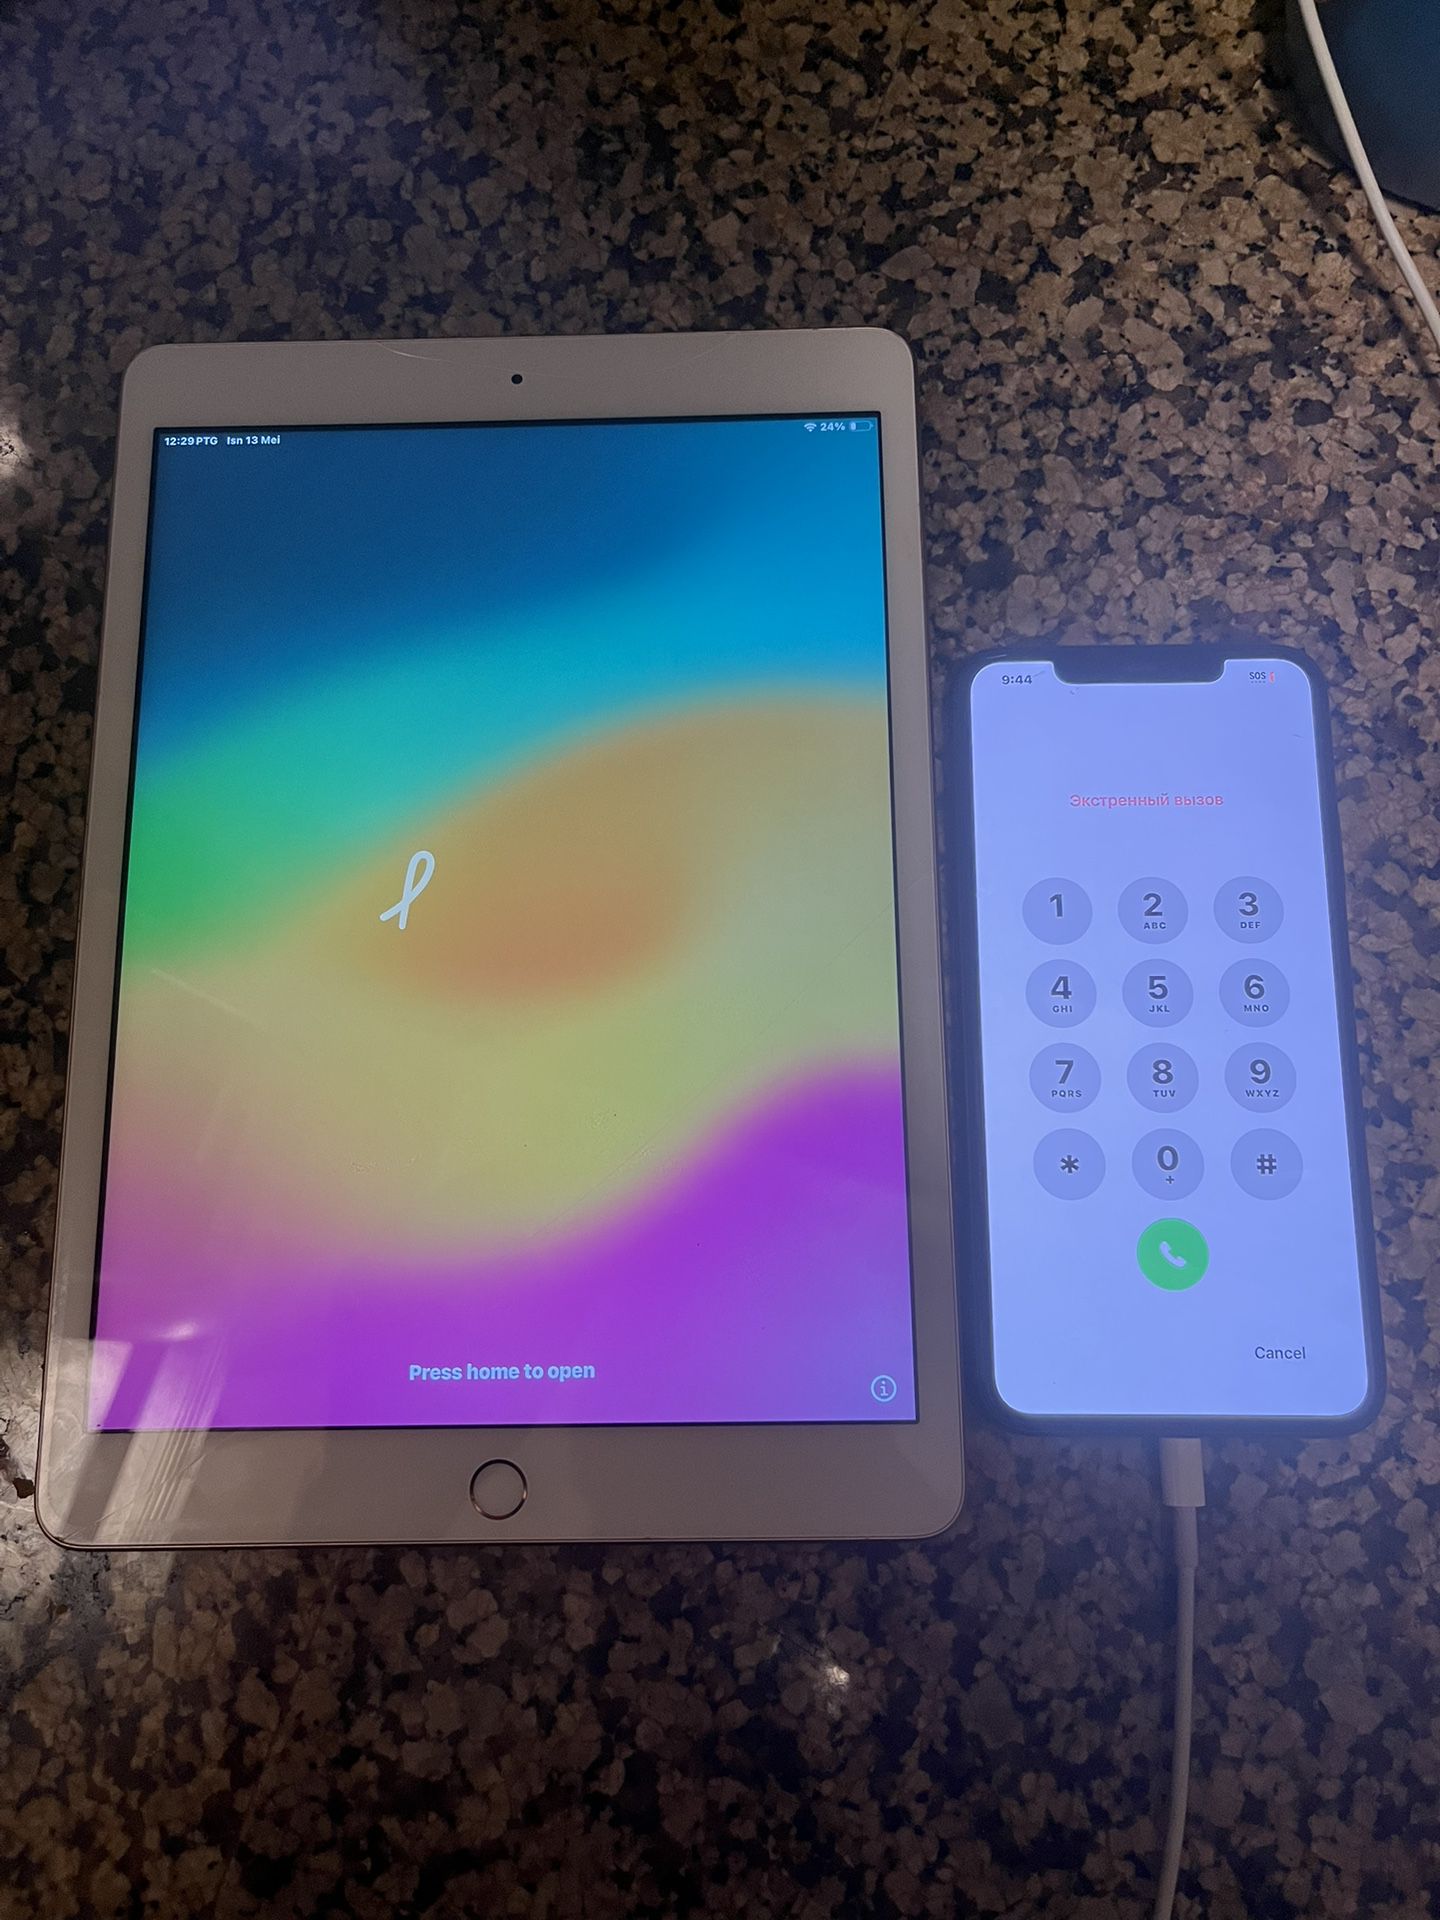 iPad 8th Generation And iPhone 11 Pro Max ((iCloud Locked)) ((read Description))